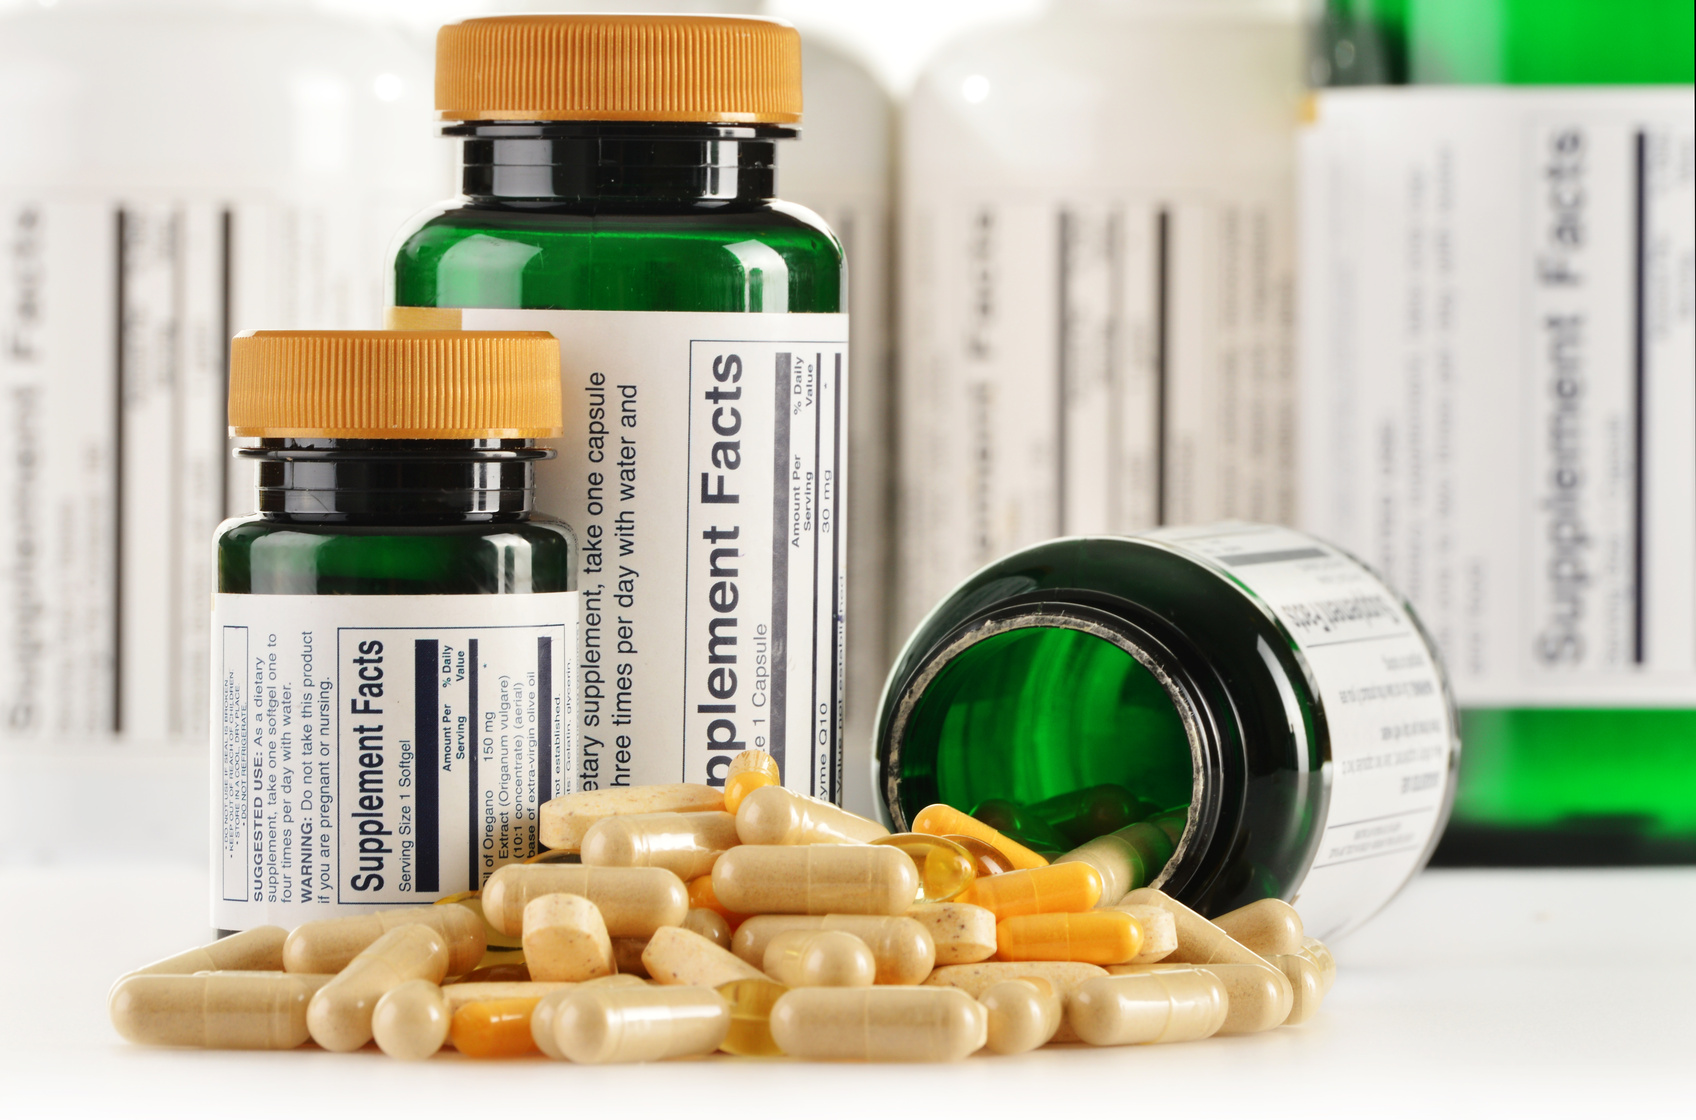 Dangerous Lawsuit Threatens the Few Supplement Health Claims Currently Allowed